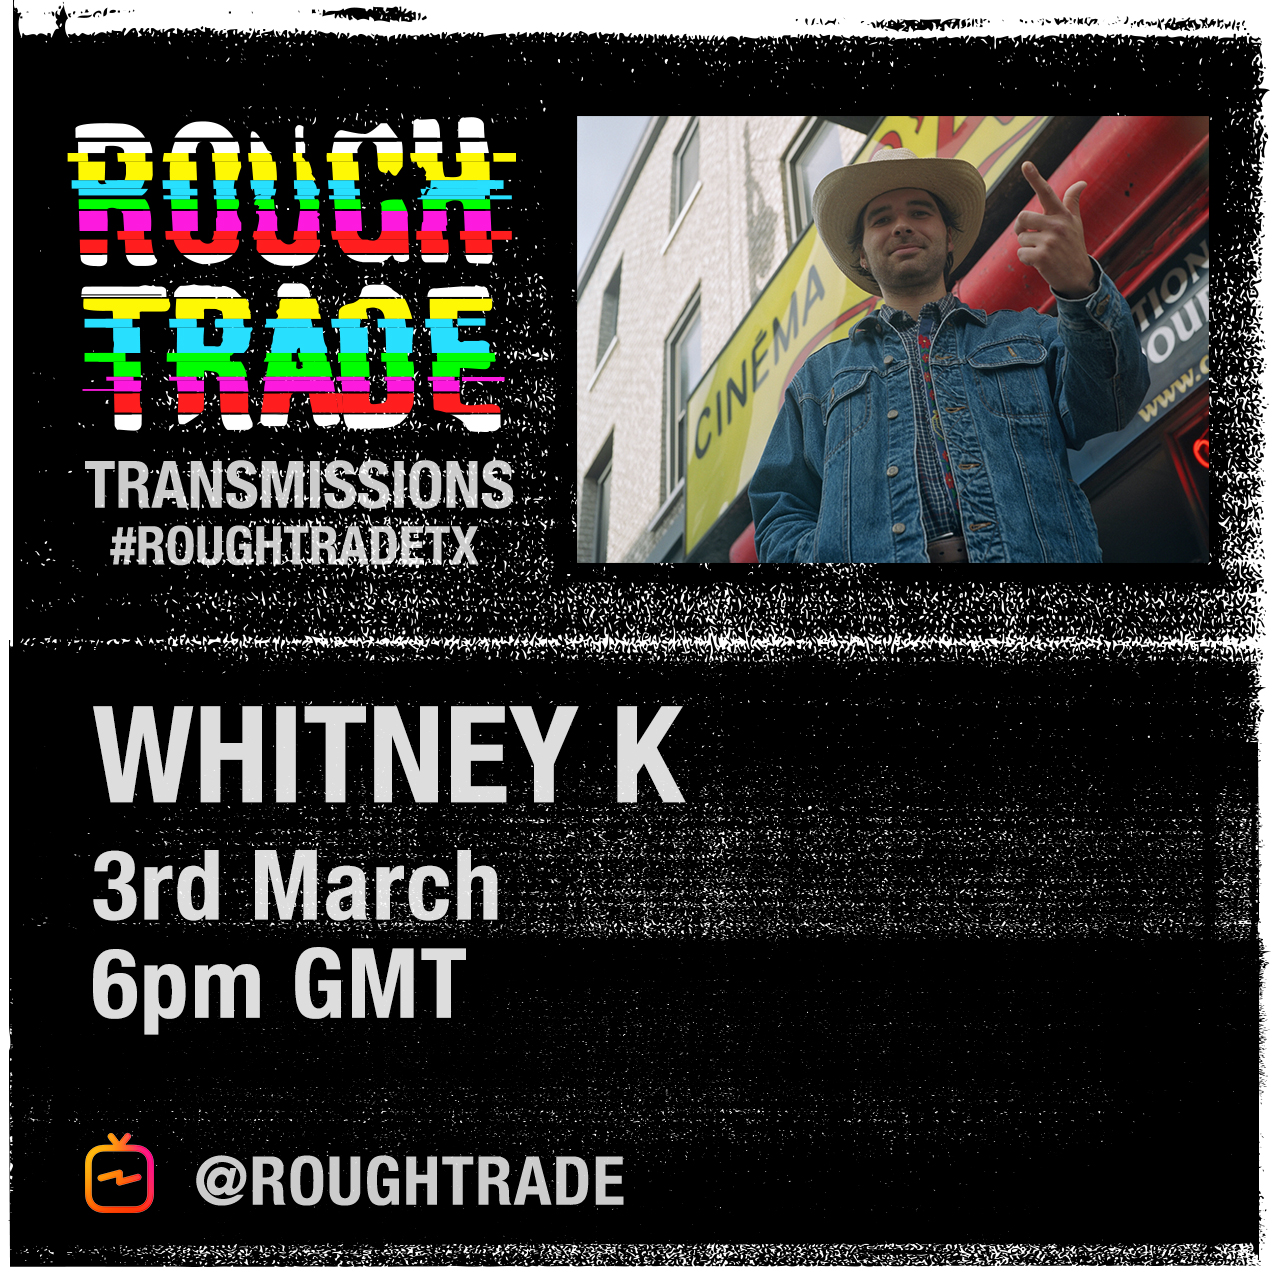 Rough Trade Transmissions featuring Whitney K @ 6pm GMT